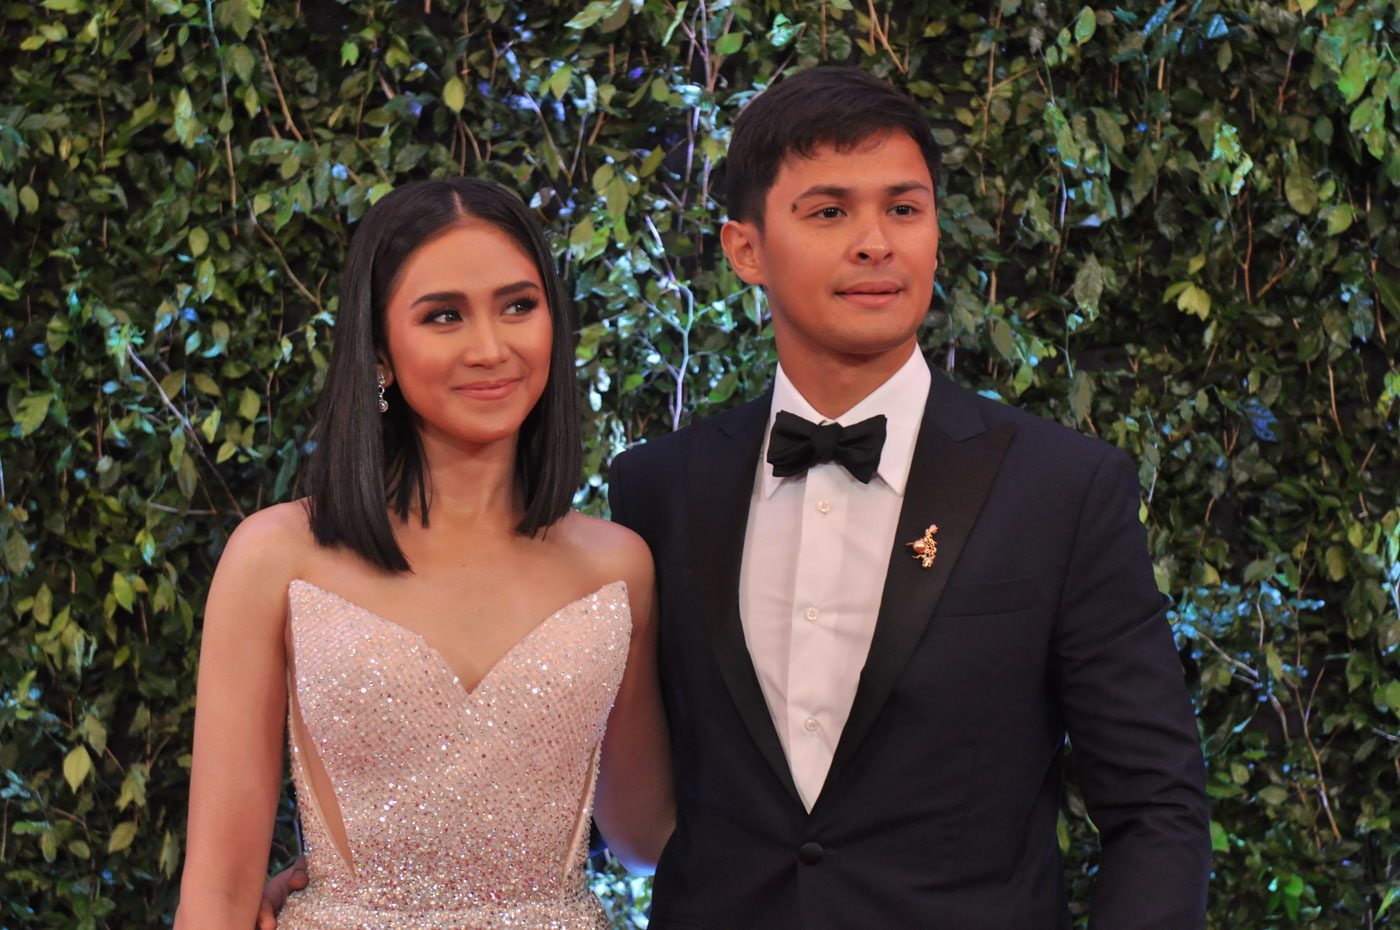 LOOK: Sarah Geronimo, Matteo Guidicelli attend the ABS-CBN Ball 2018